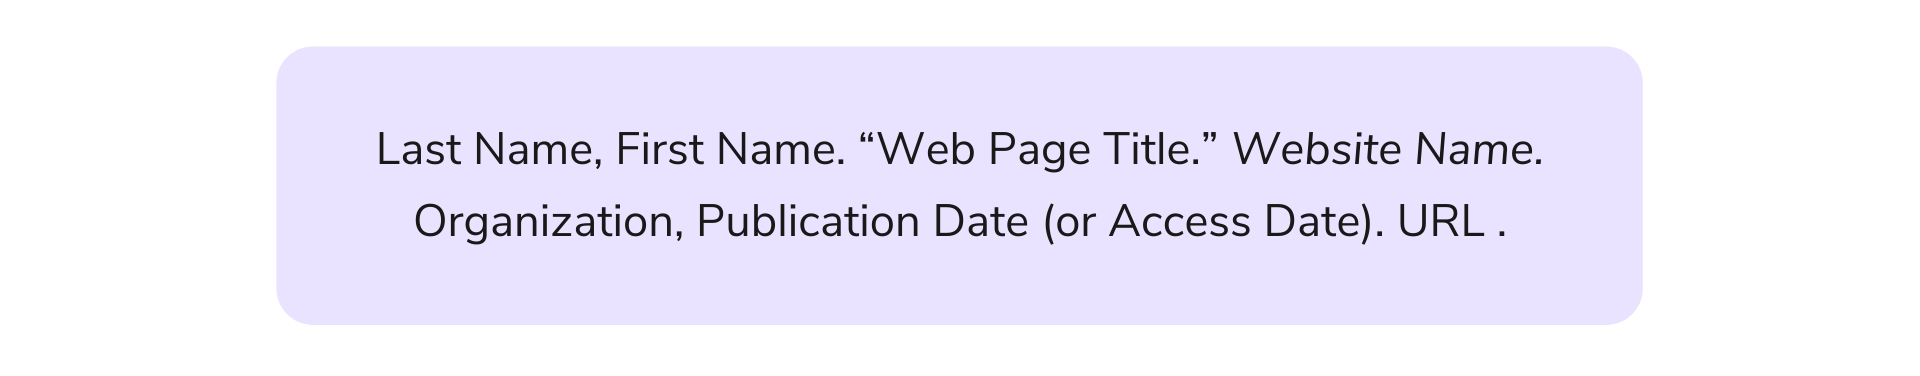 How to cite a website in Chicago